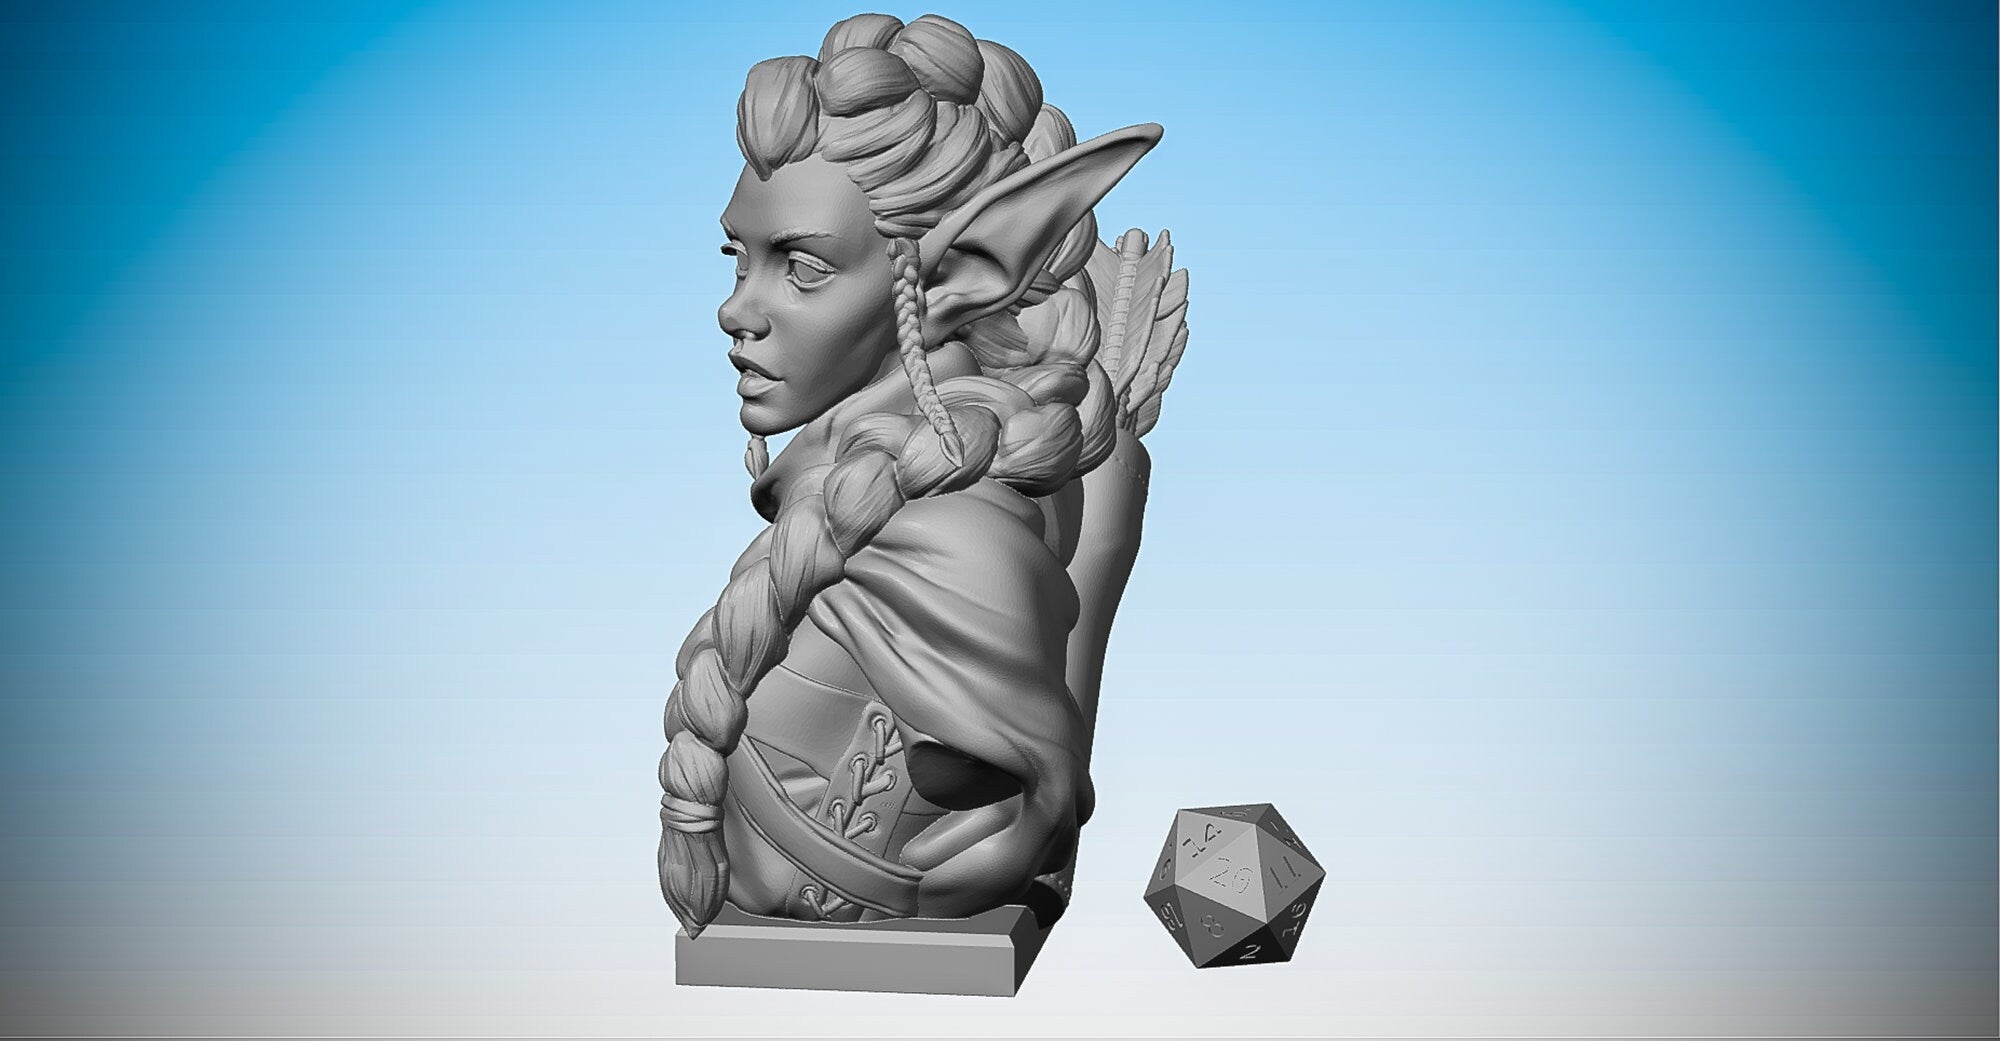 ELF BUST | Figurine | Collectors | Lord of the Rings | Dungeons & Dragons | Pathfinder | 3D Print | Hero Size-Figurines